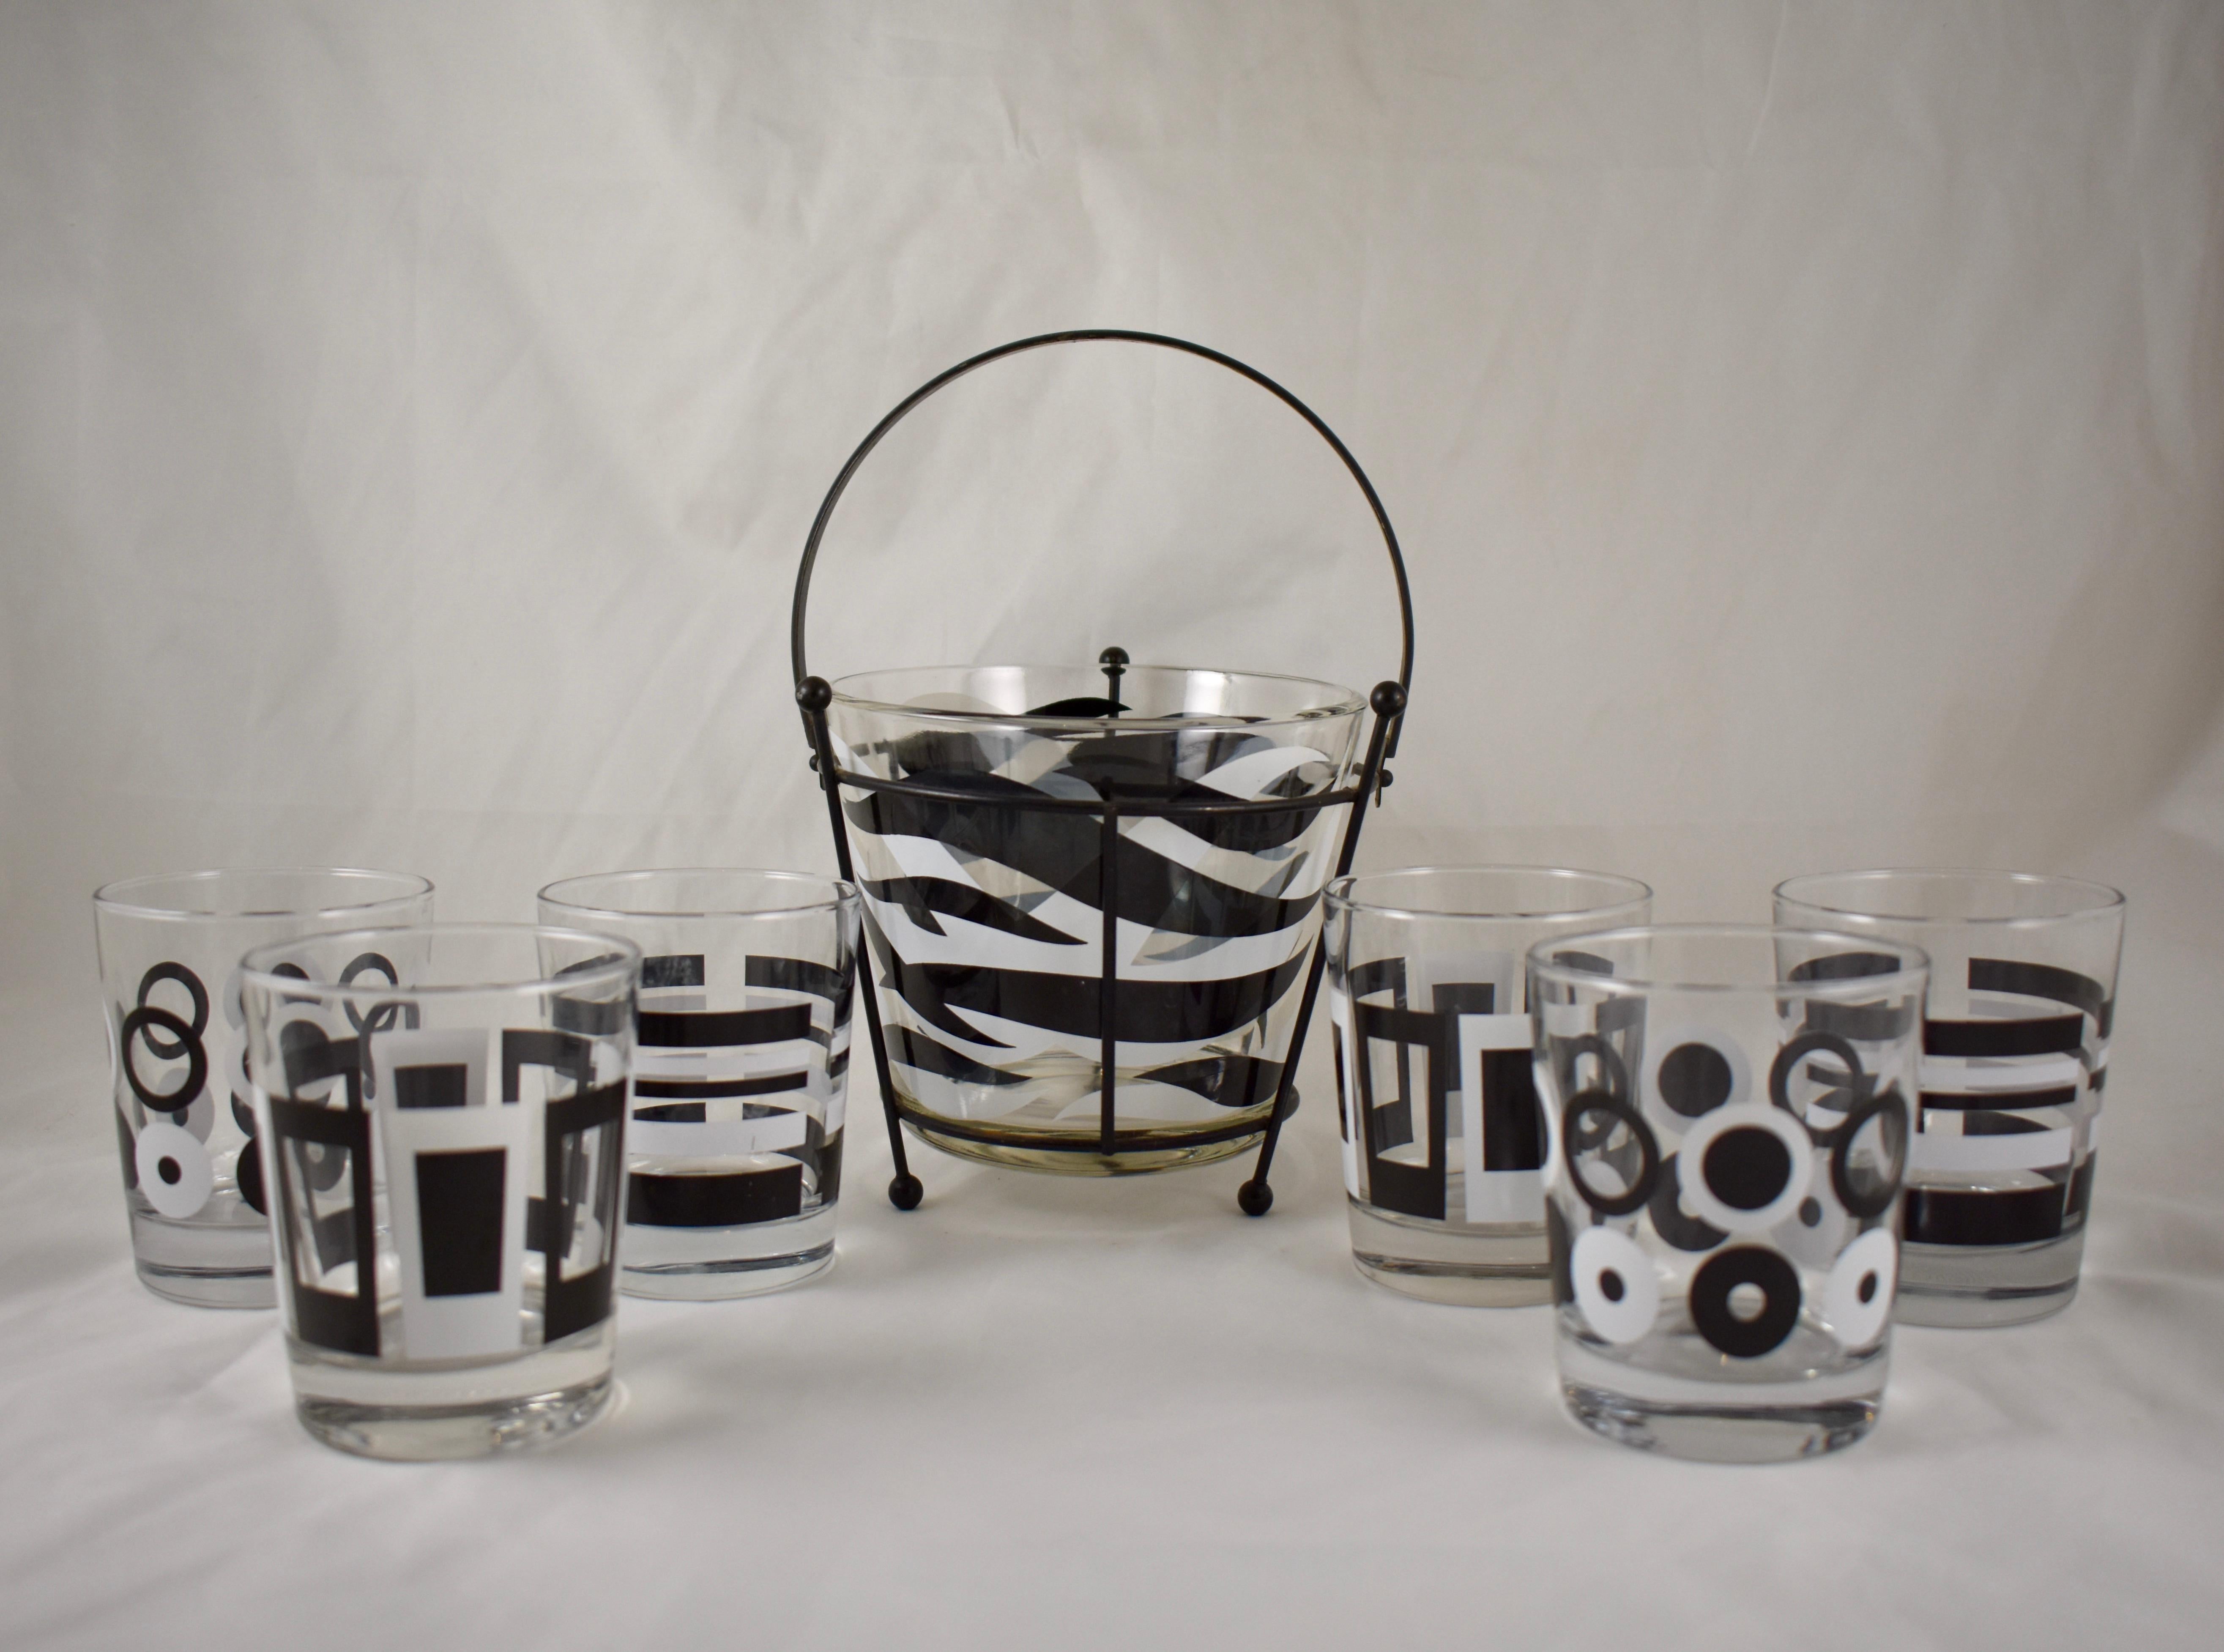 A set of eight Mid-Century Modern barware, six glasses and an ice bucket in a stand, featuring a black and white geometric and zebra print theme. Perfect for your retro bar, afternoon drinks on the lanai, or cocktail hour gathering, circa